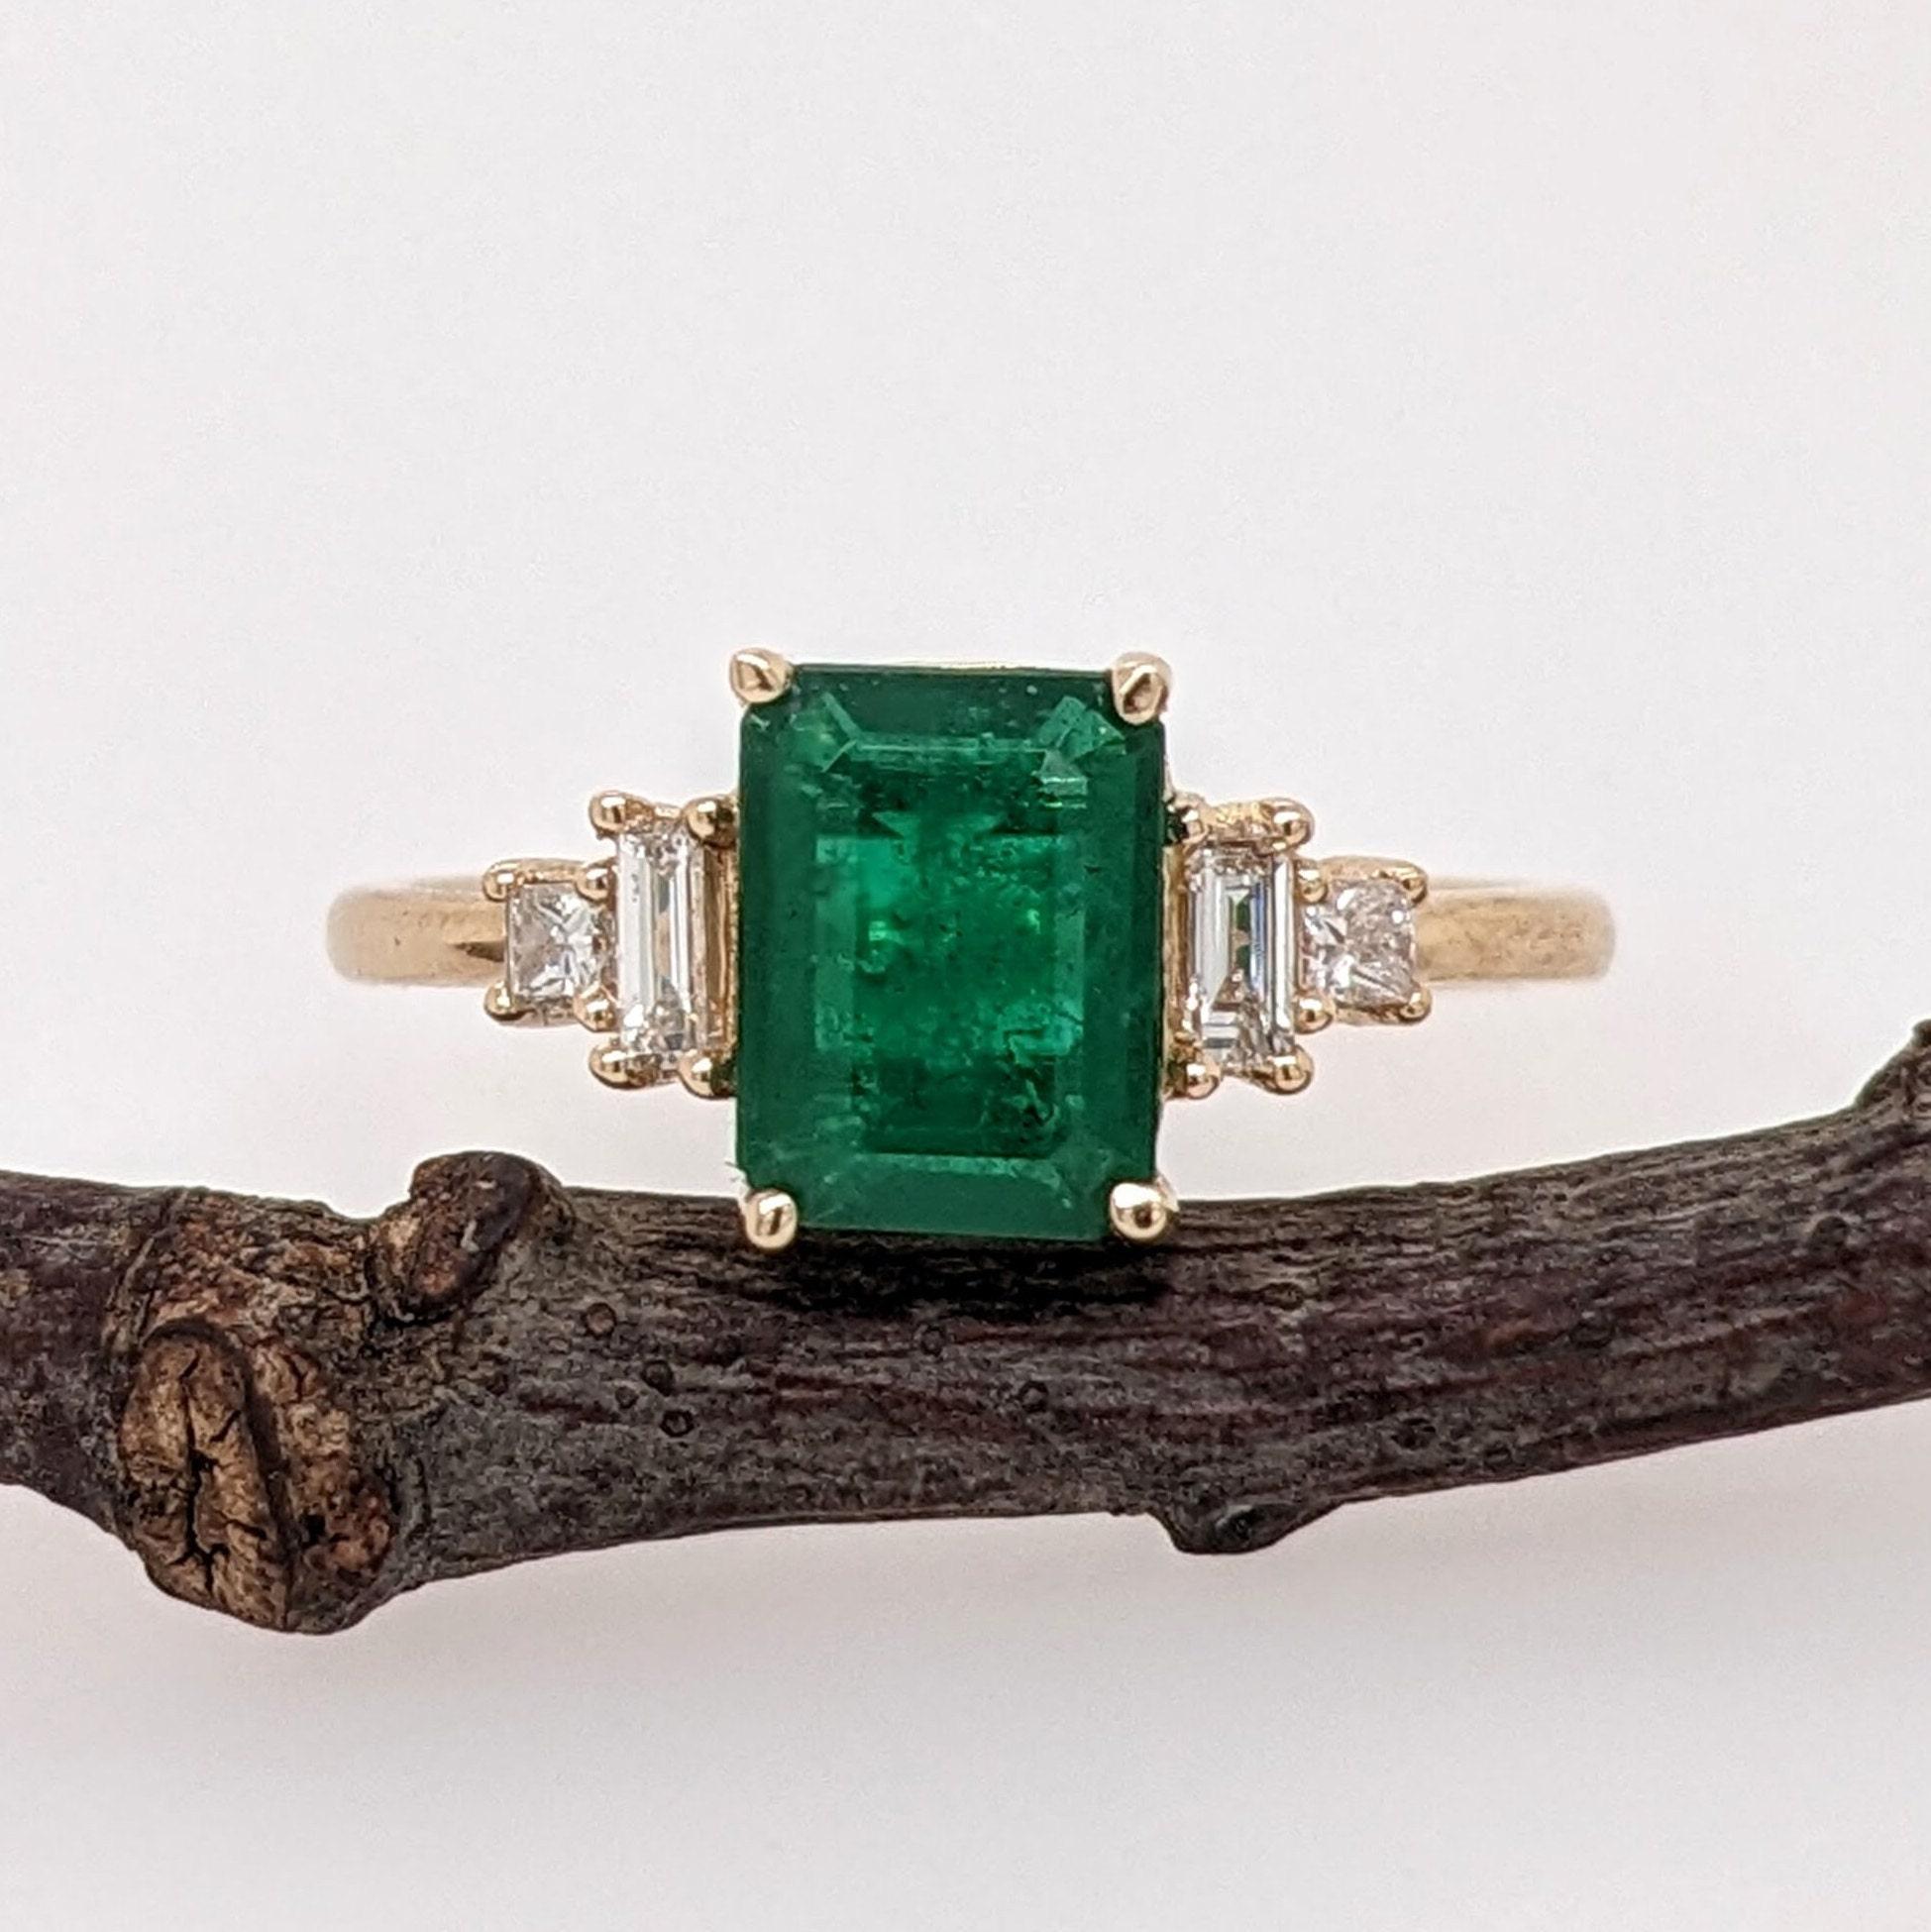 A vivid green emerald looks exquisite in this elegant minimalist ring with cute diamond accents.  A statement ring design perfect for an eye catching engagement or anniversary. This ring also makes a beautiful May birthstone ring for your loved